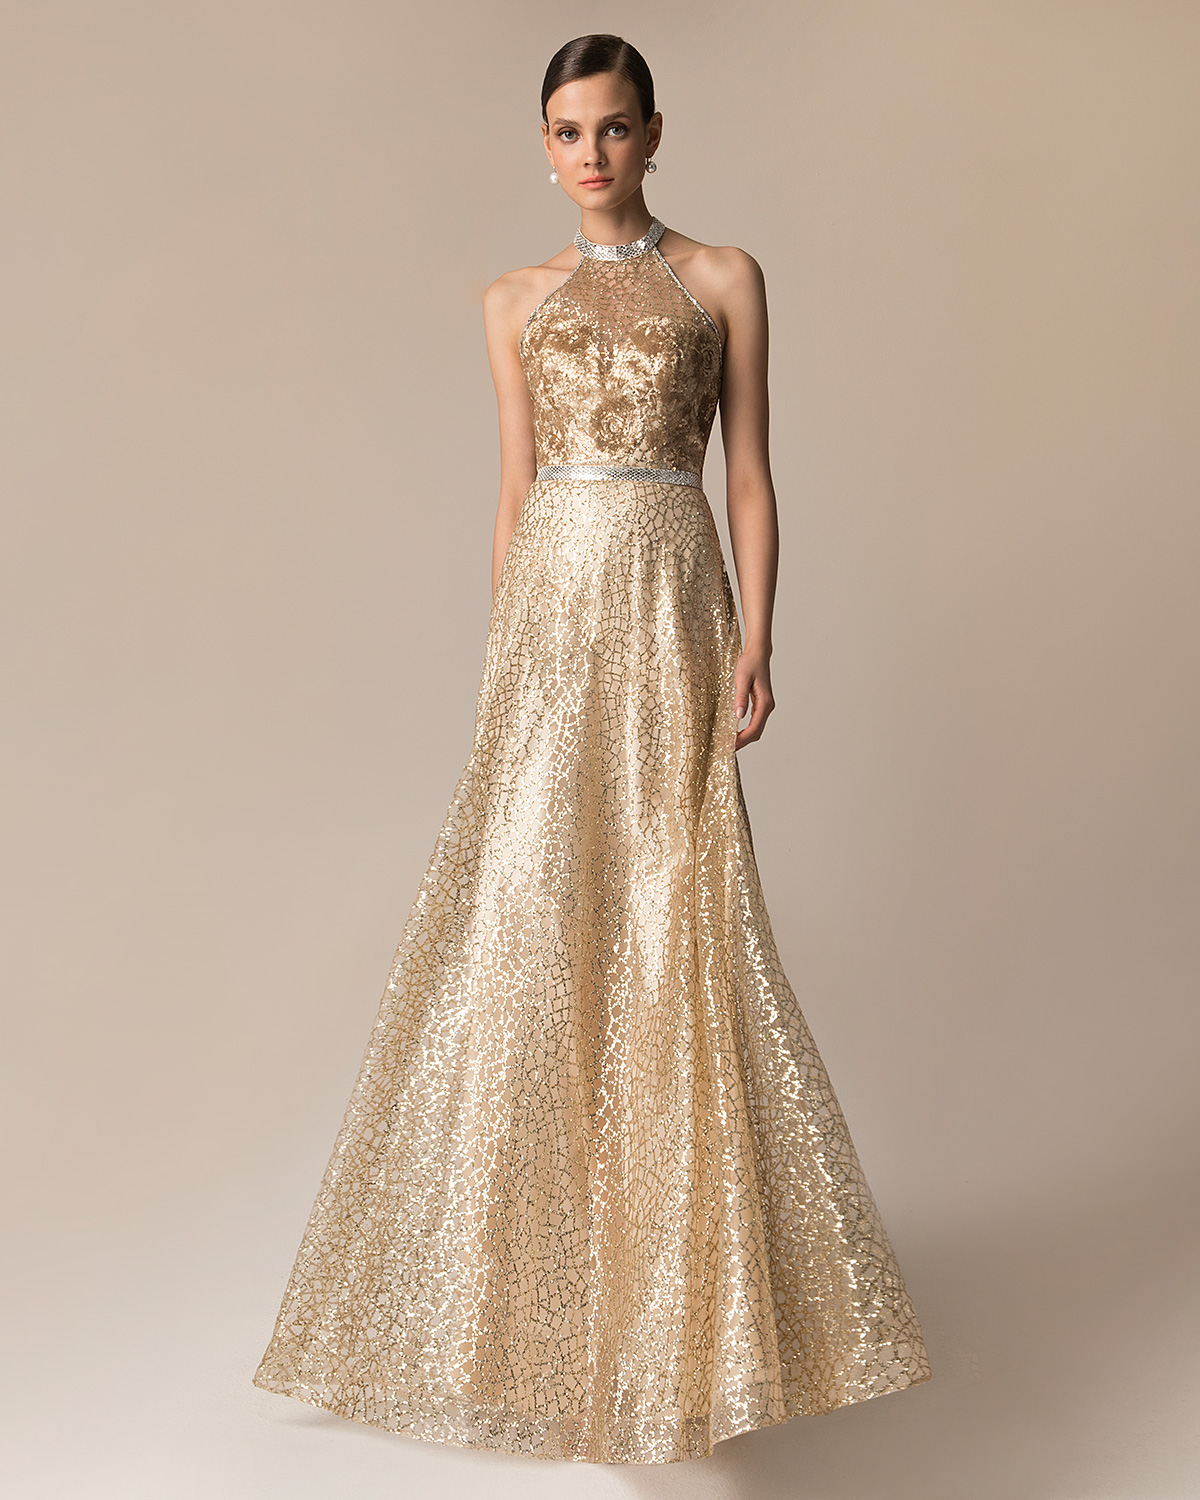 Evening Dresses / Long evening fully beaded dress with shining fabric and open back